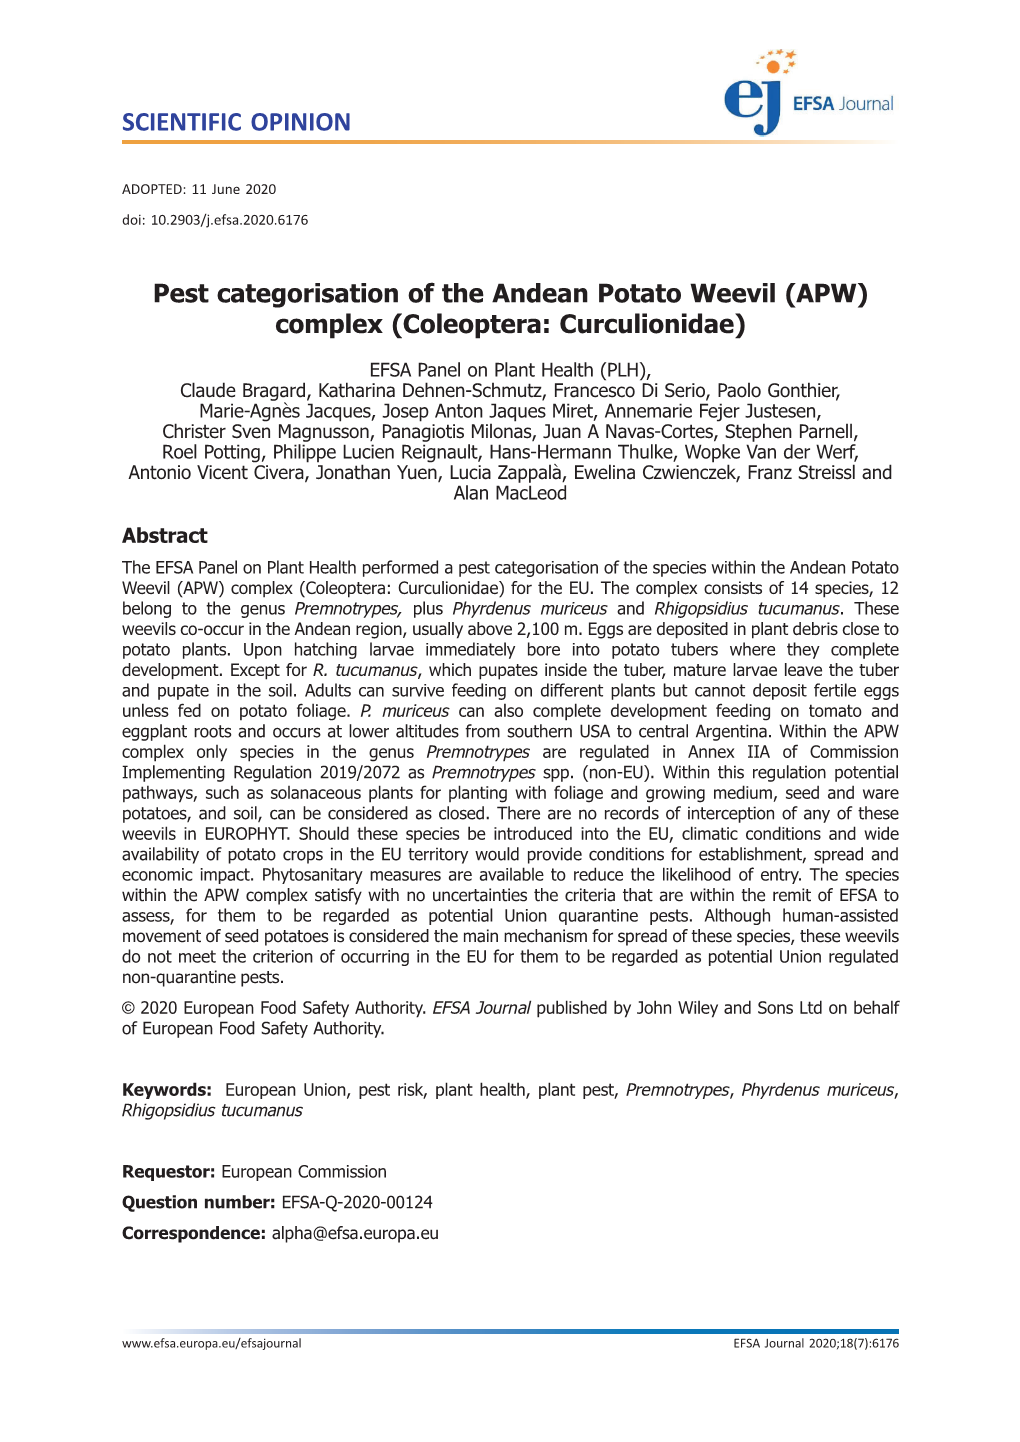 Pest Categorisation of the Andean Potato Weevil (APW) Complex (Coleoptera: Curculionidae)